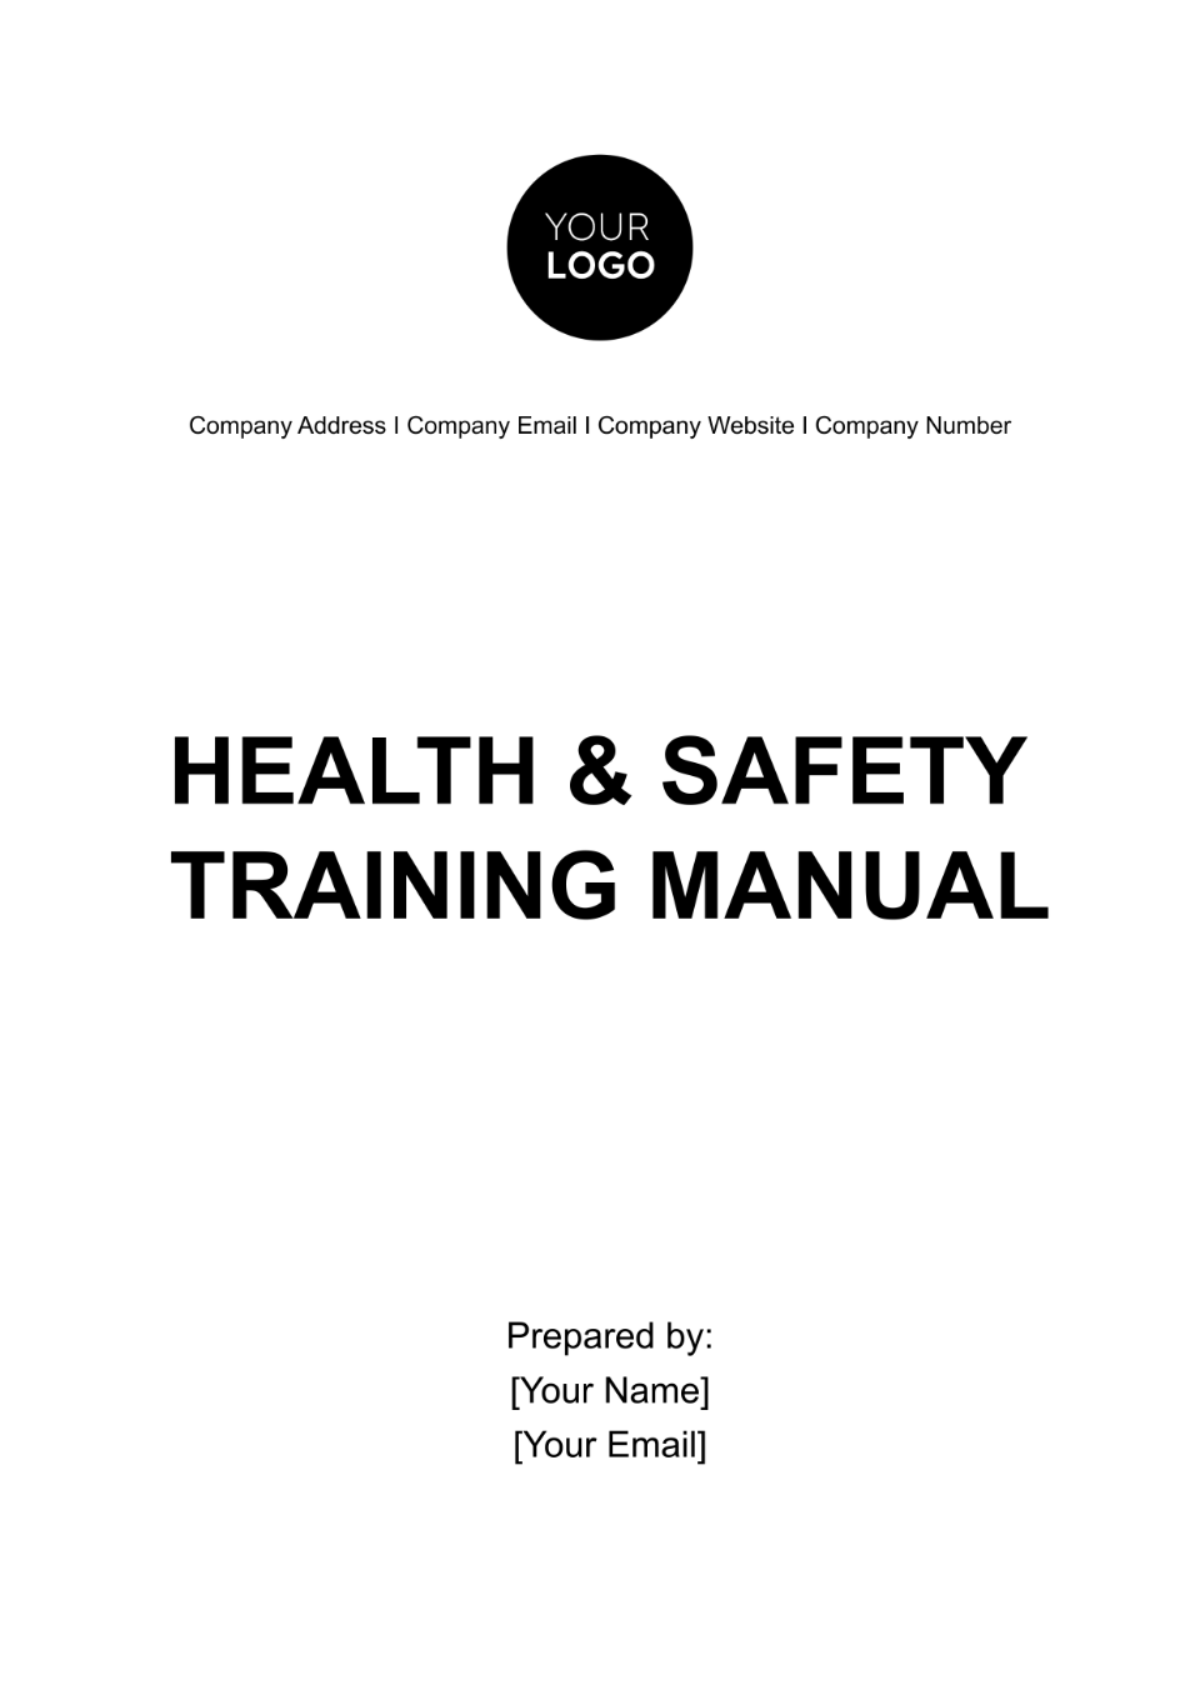 Free Health & Safety Training Manual Template